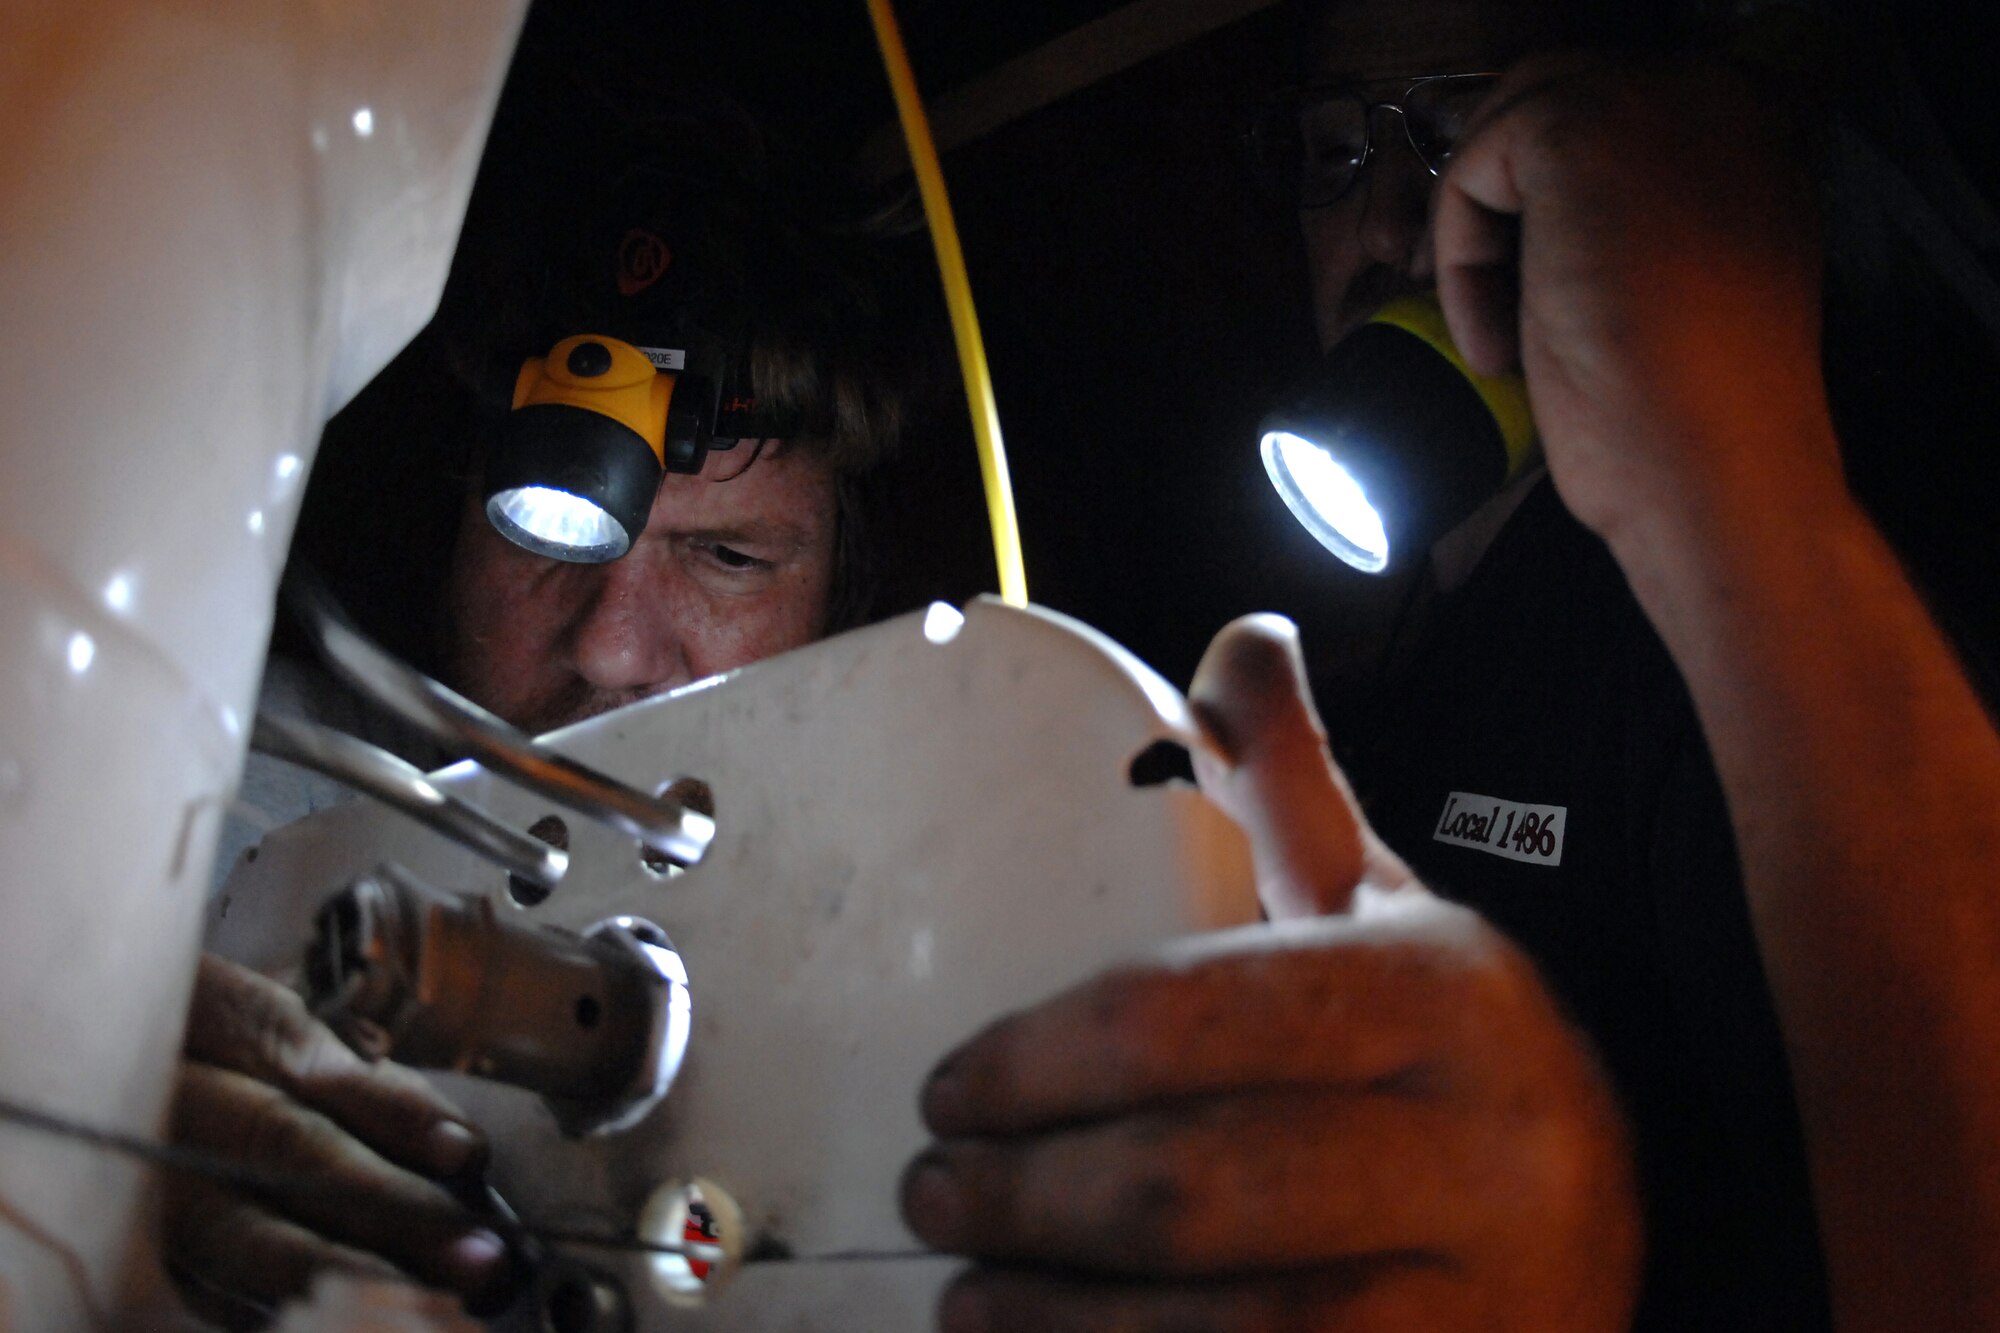 OFFUTT AIR FORCE BASE, Neb. -- Jeff Kuehn (left) and David Alwine, aircraft mechanics with the 55th Maintenance Squadron, repair a nose wheel steering metering valve on a TC-135W pilot training aircraft here, Oct. 1. (U.S. Air Force Photo By Josh Plueger)